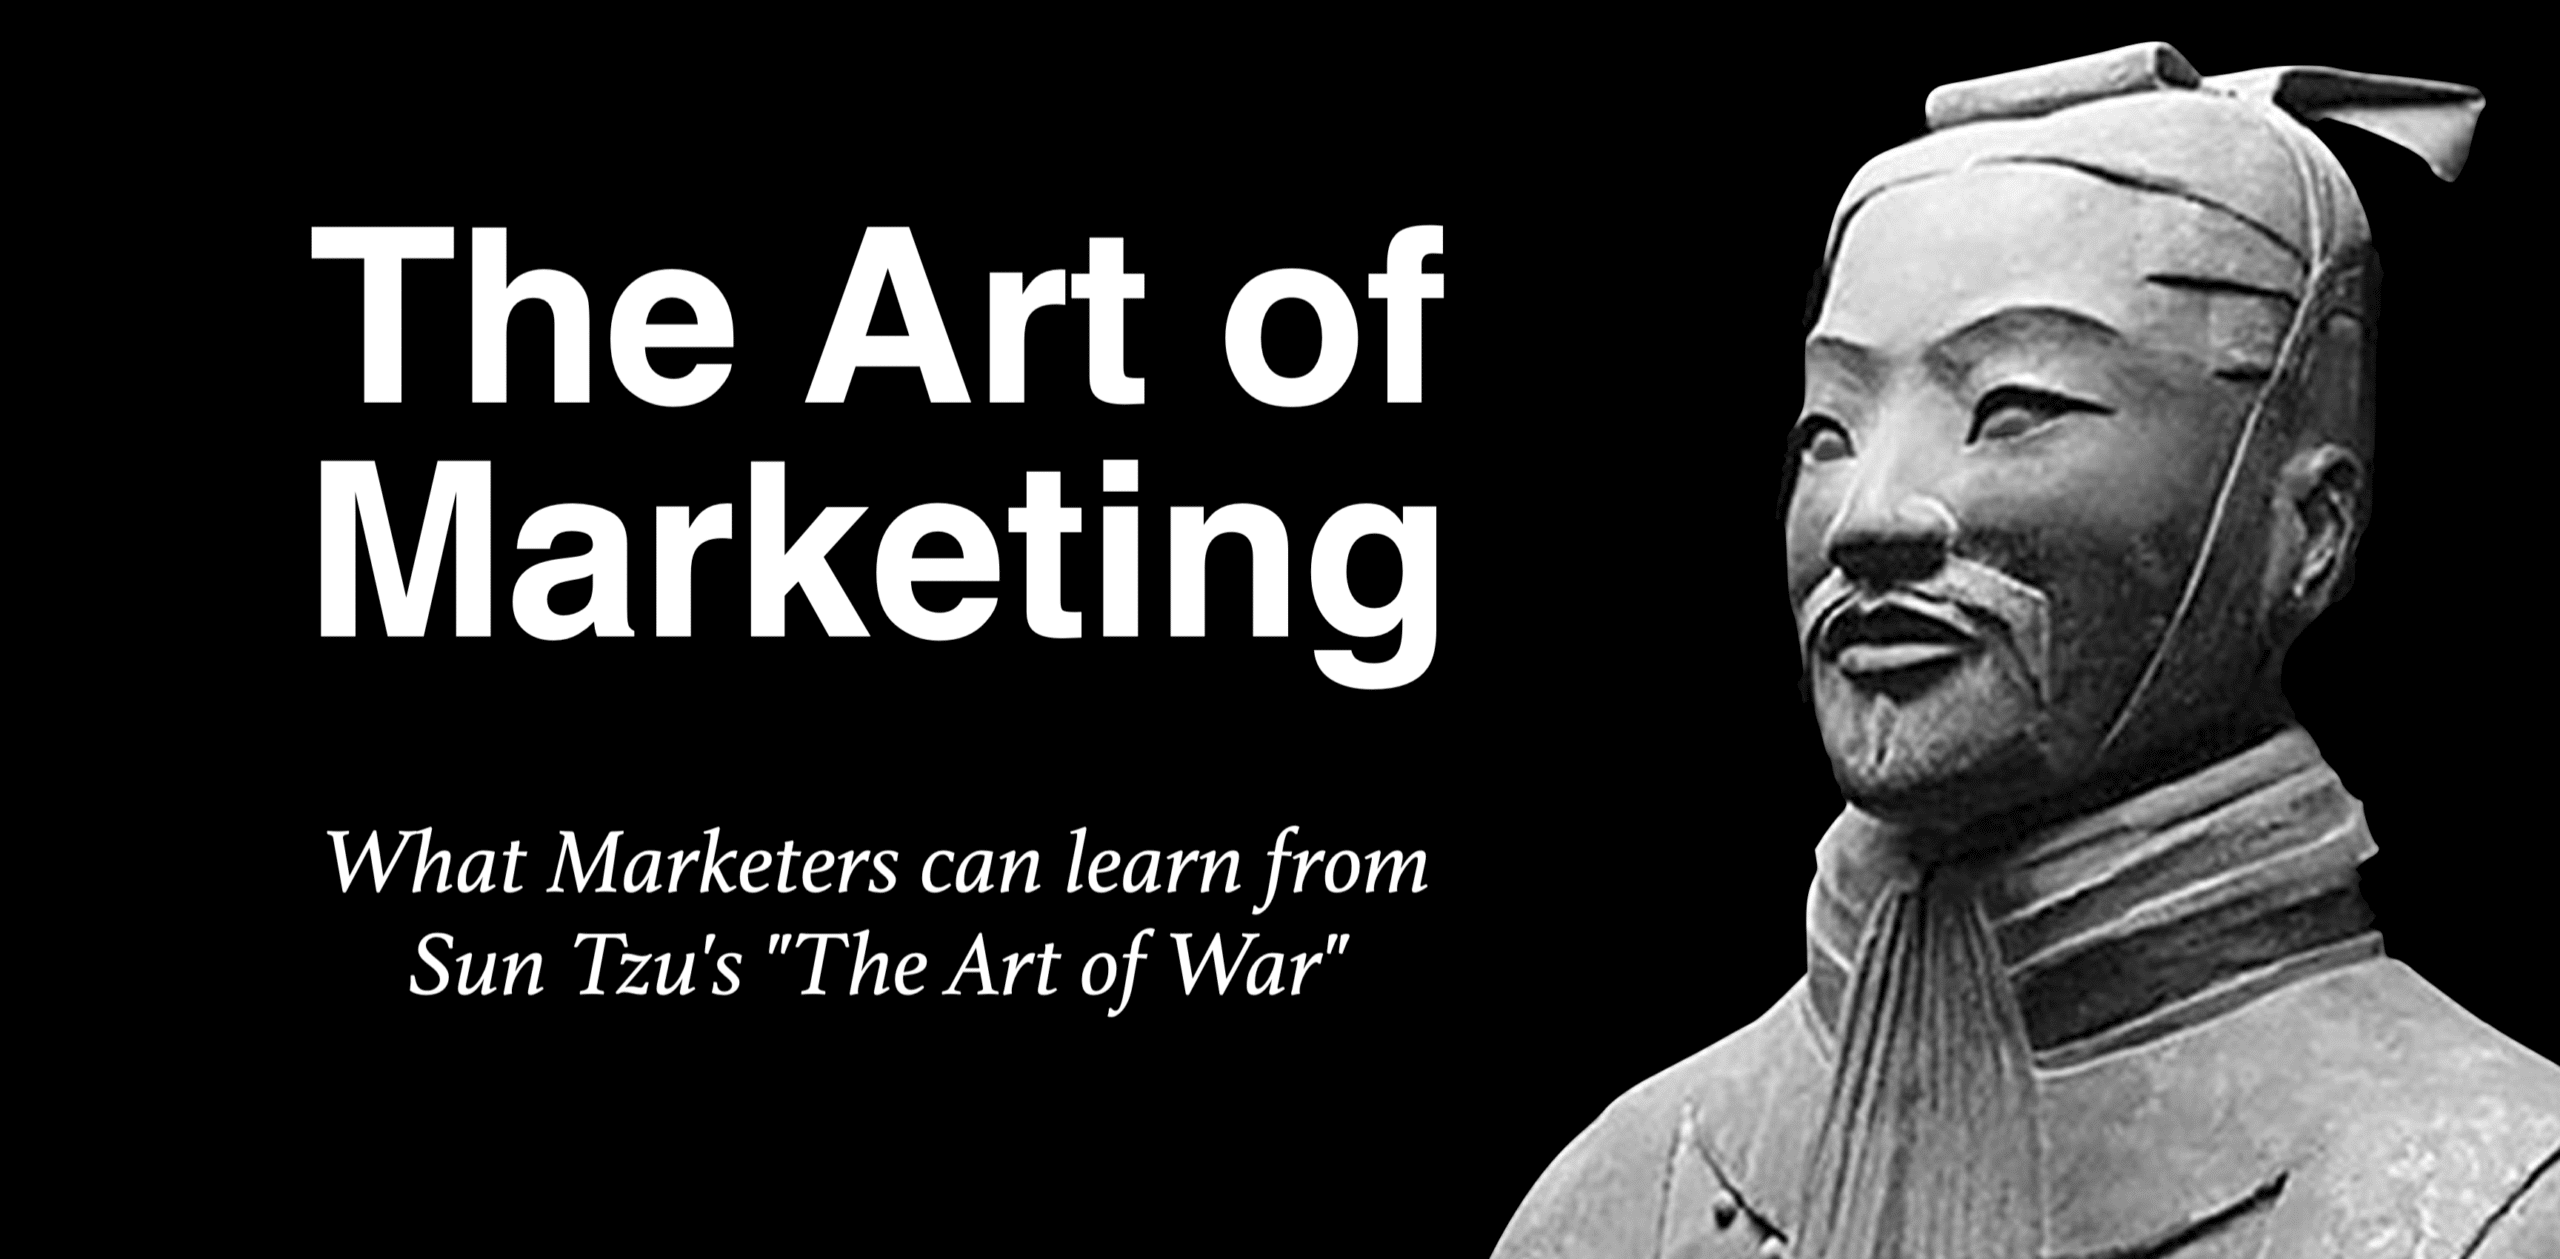 The art of marketing - What marketers can learn from Sun Tzu's the art of war